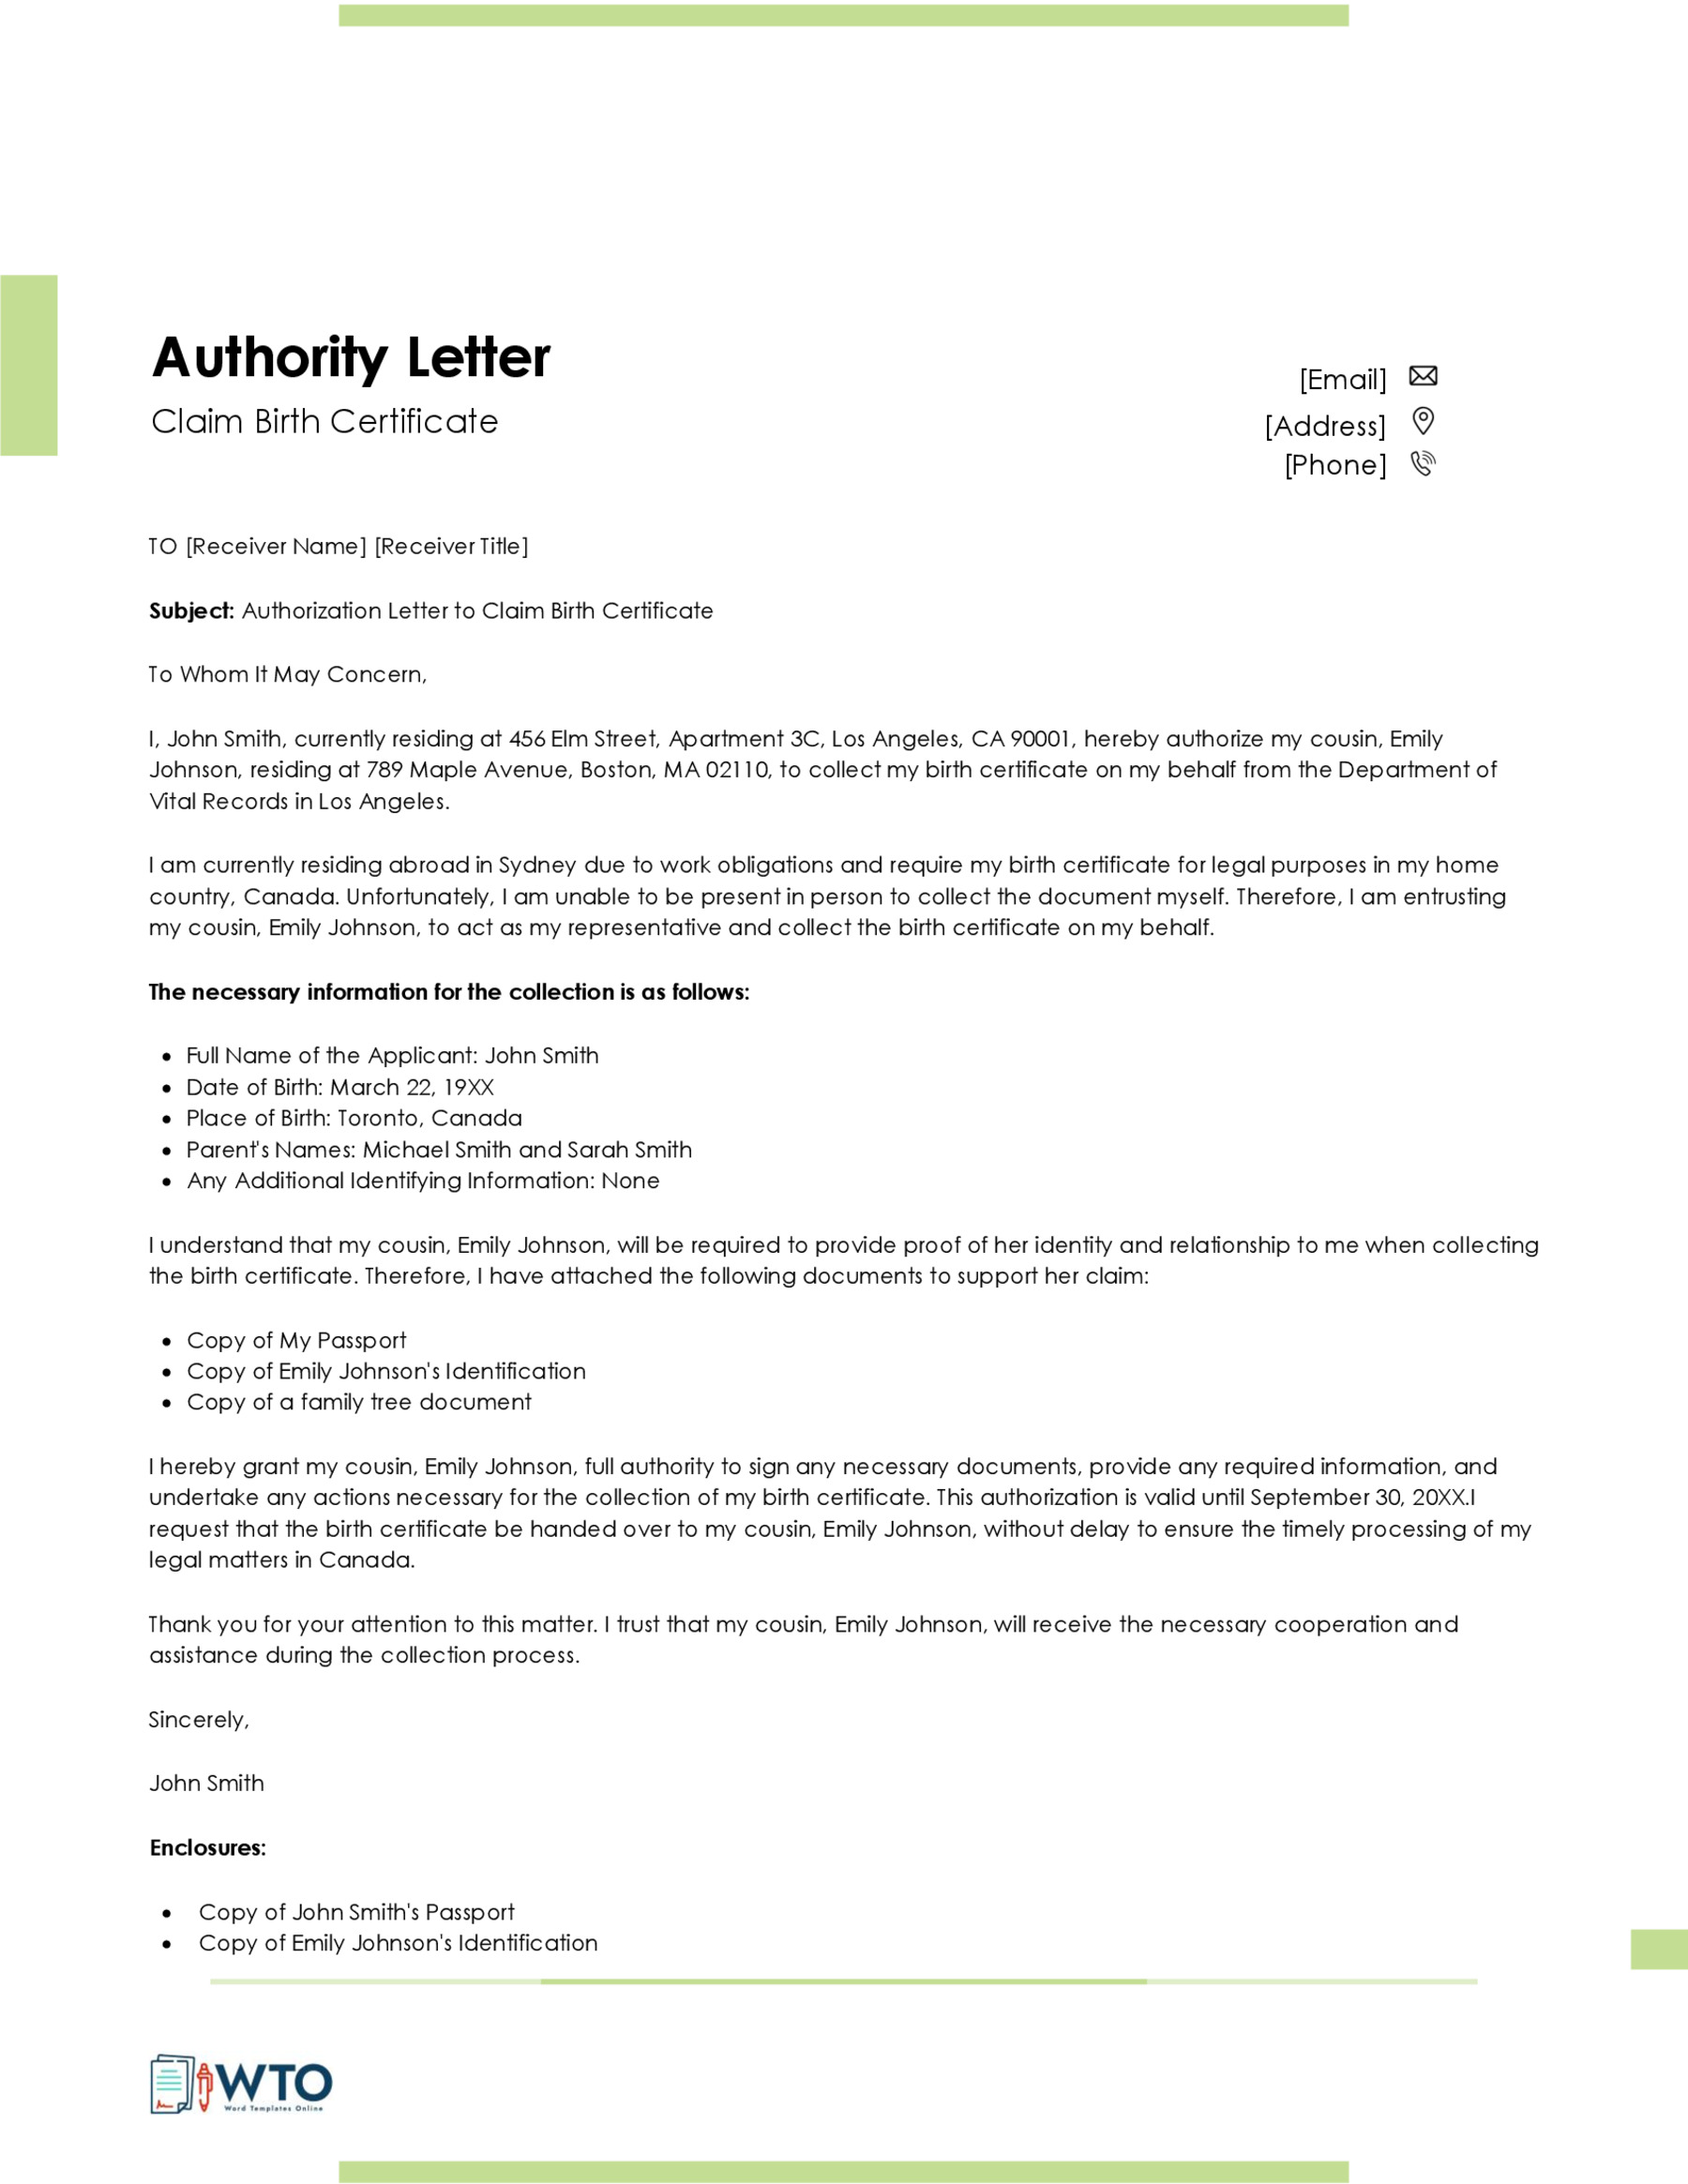 Sample Authorization Letter for Claiming Birth Certificate-Word Format